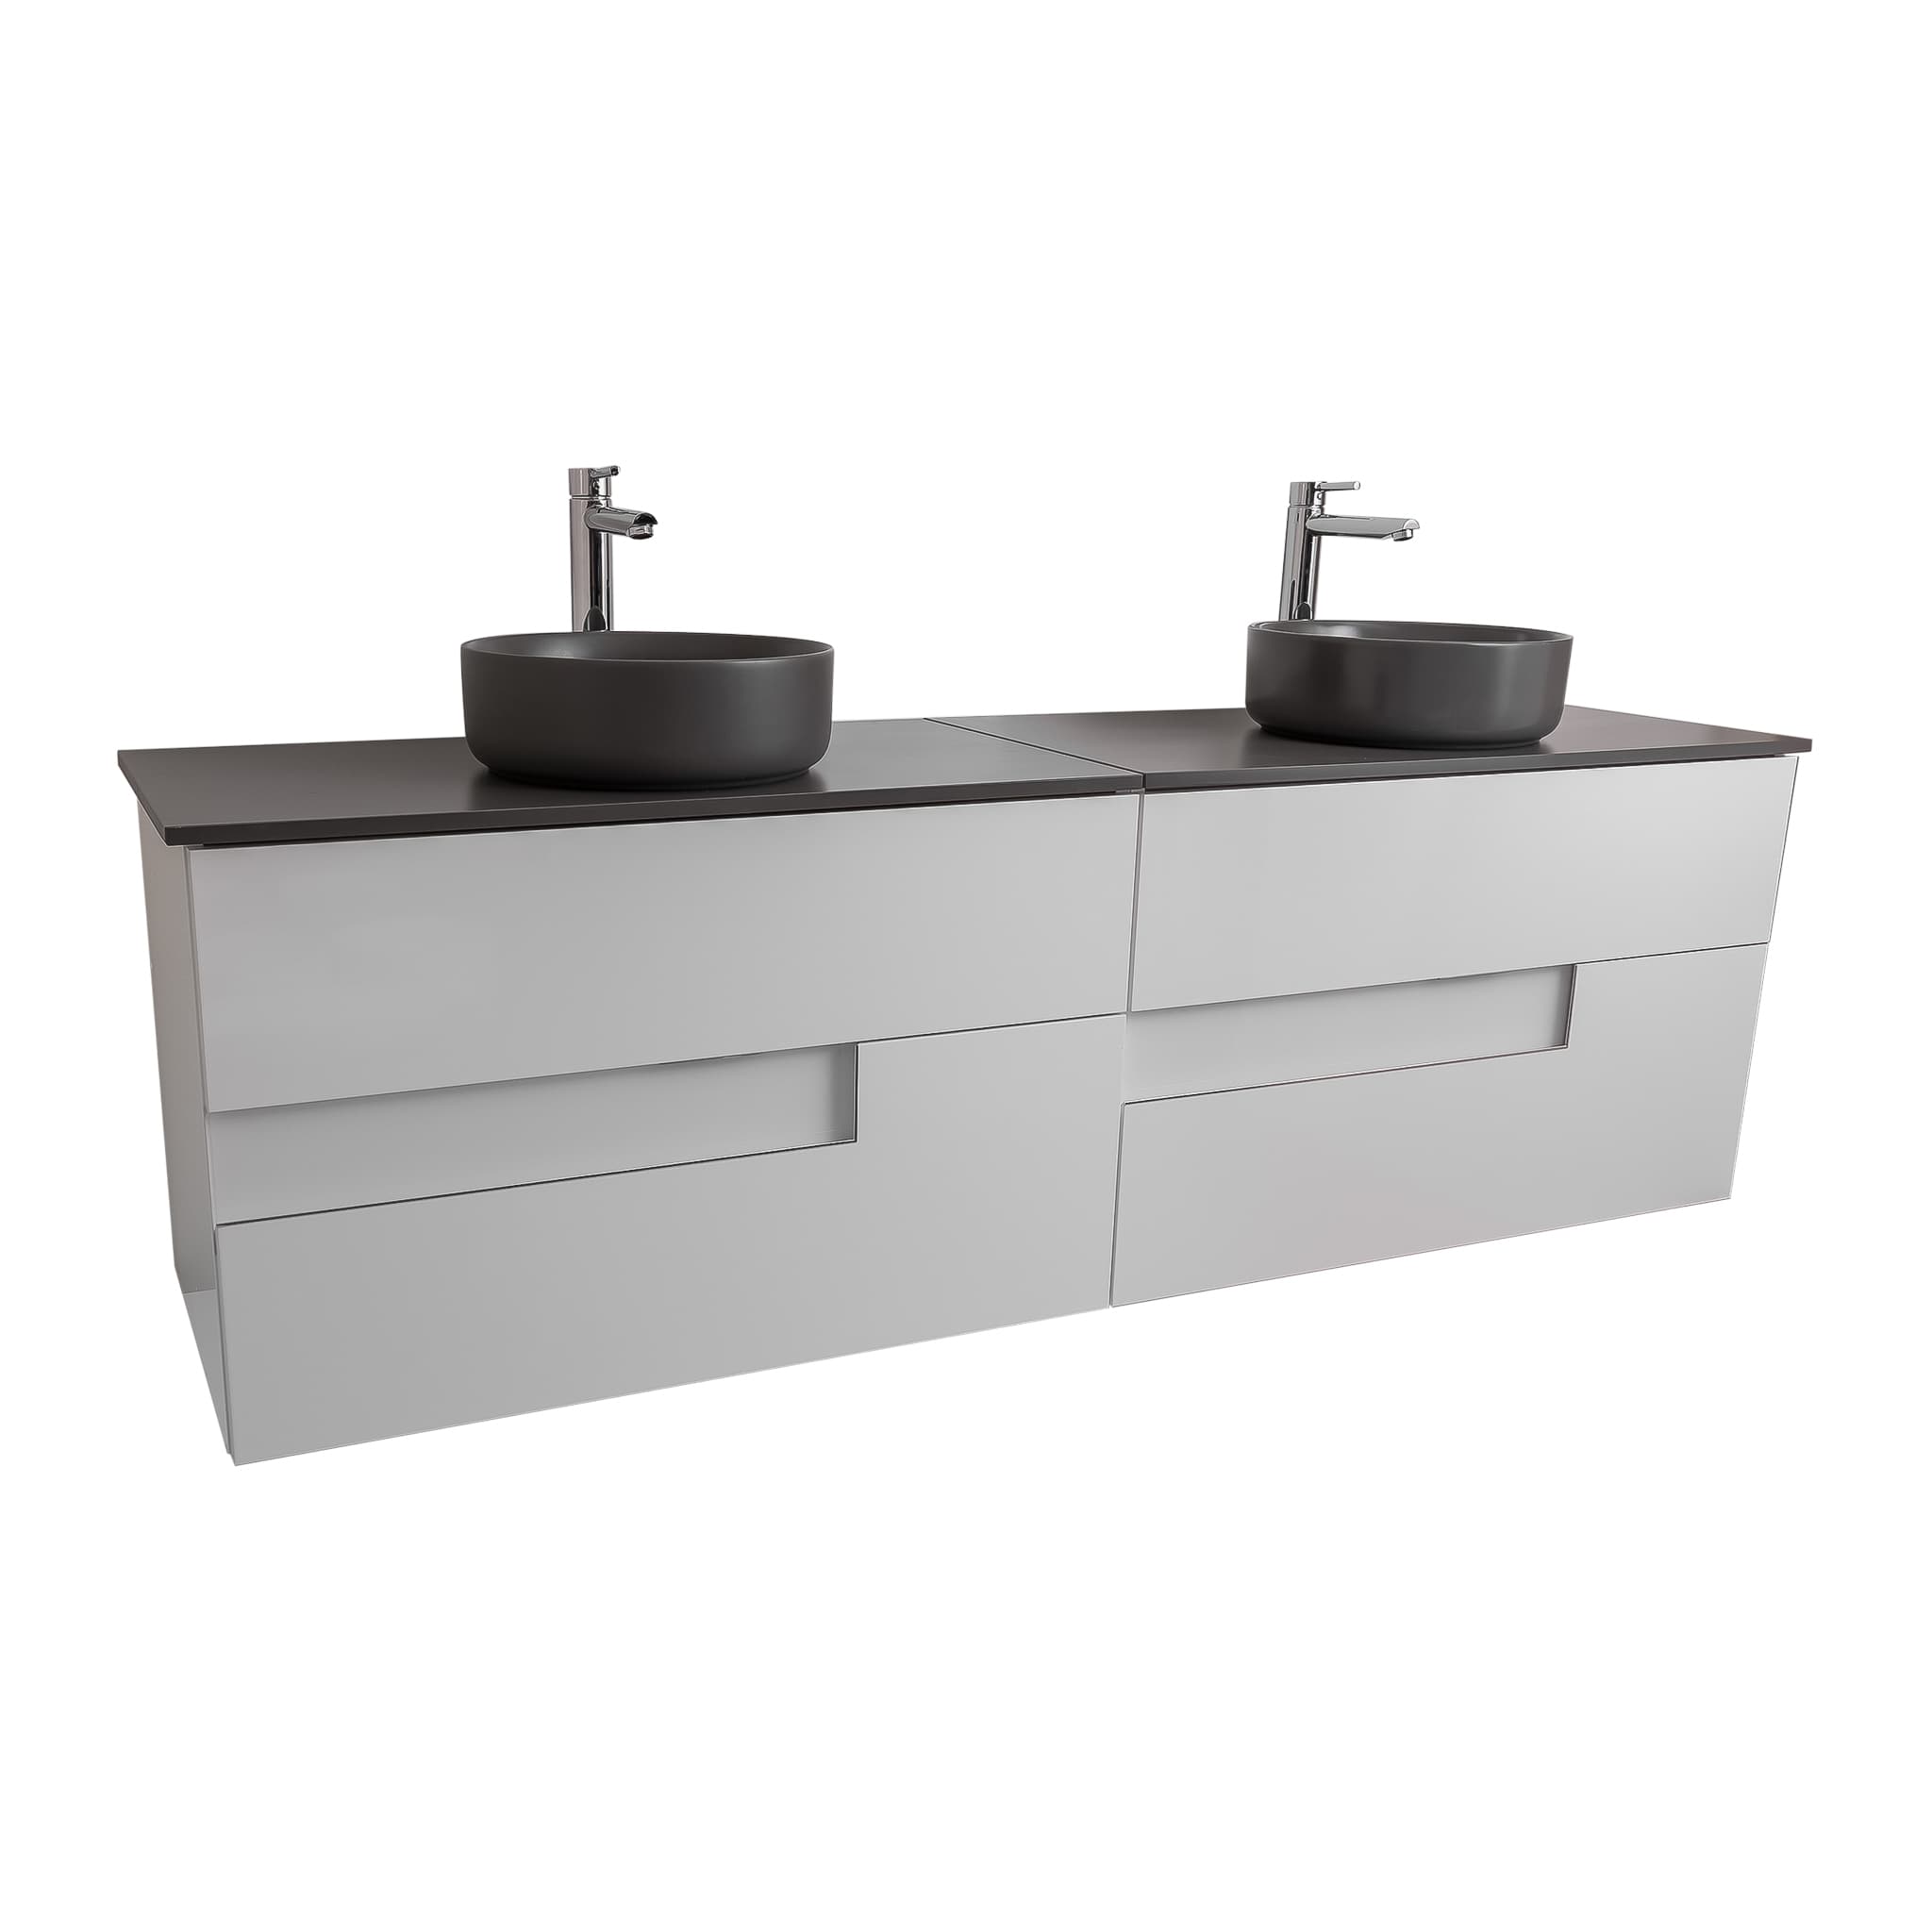 Vision 72 White High Gloss Cabinet, Ares Grey Ceniza Top And Two Ares Grey Ceniza Ceramic Basin, Wall Mounted Modern Vanity Set